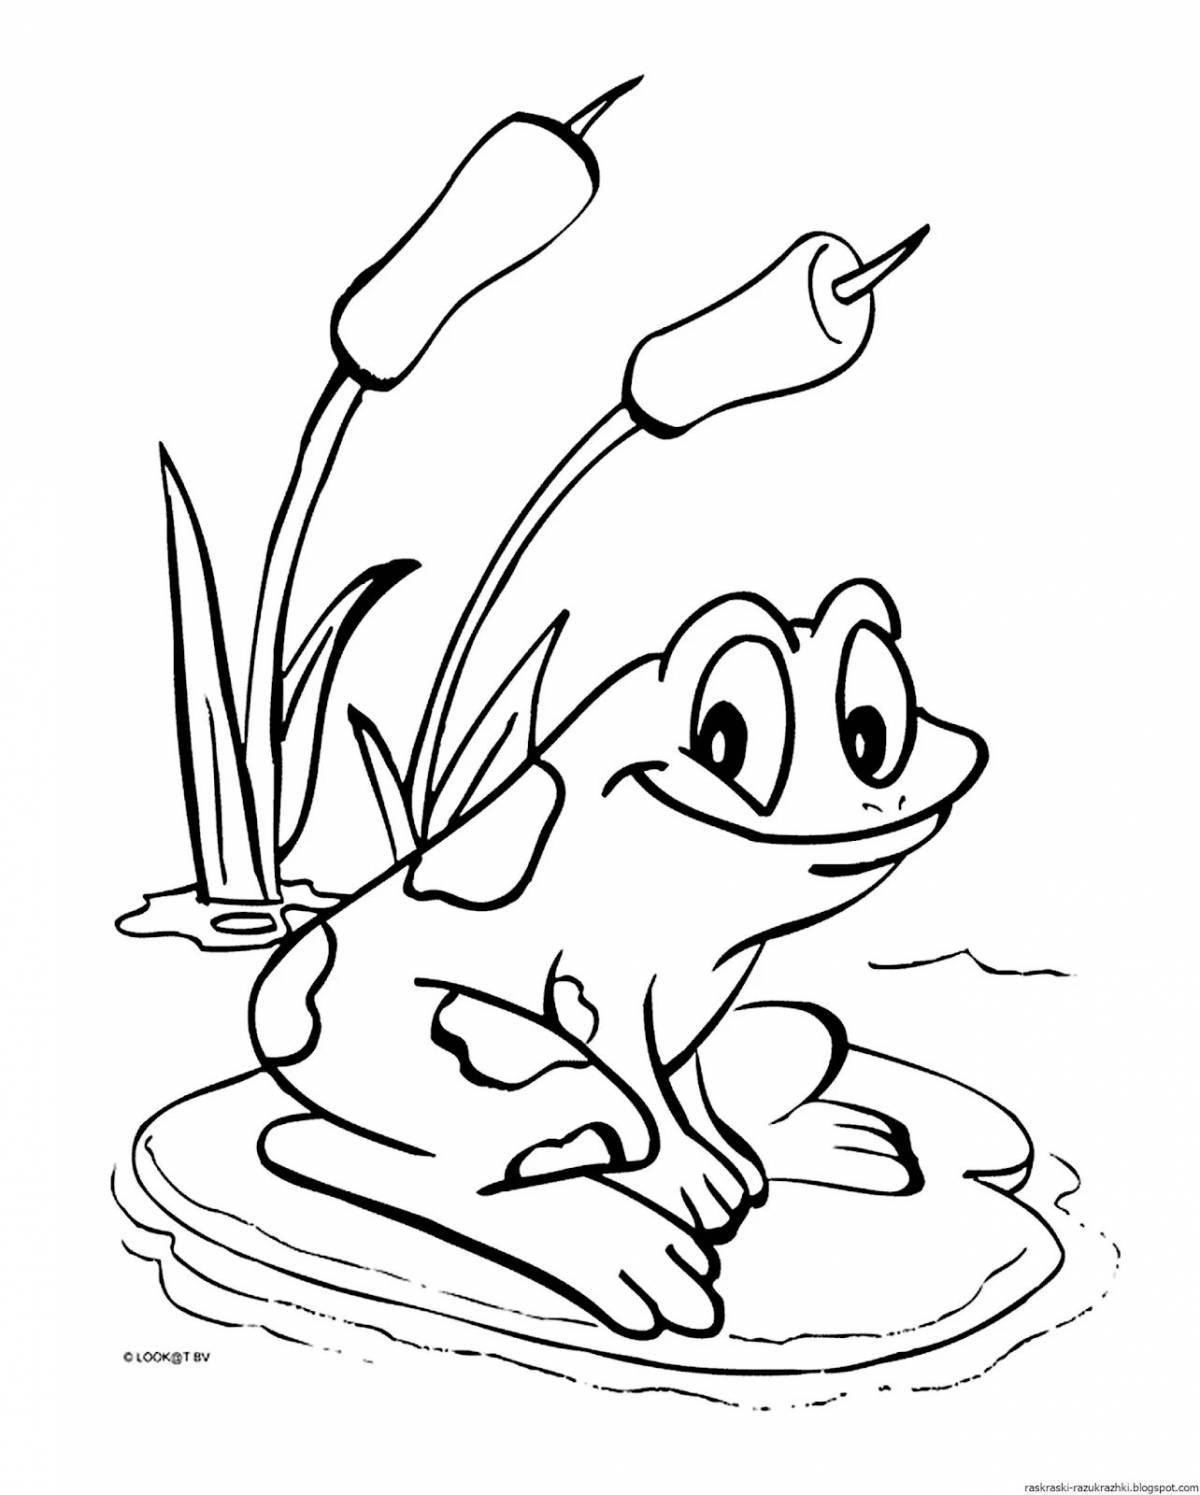 Living tank coloring page